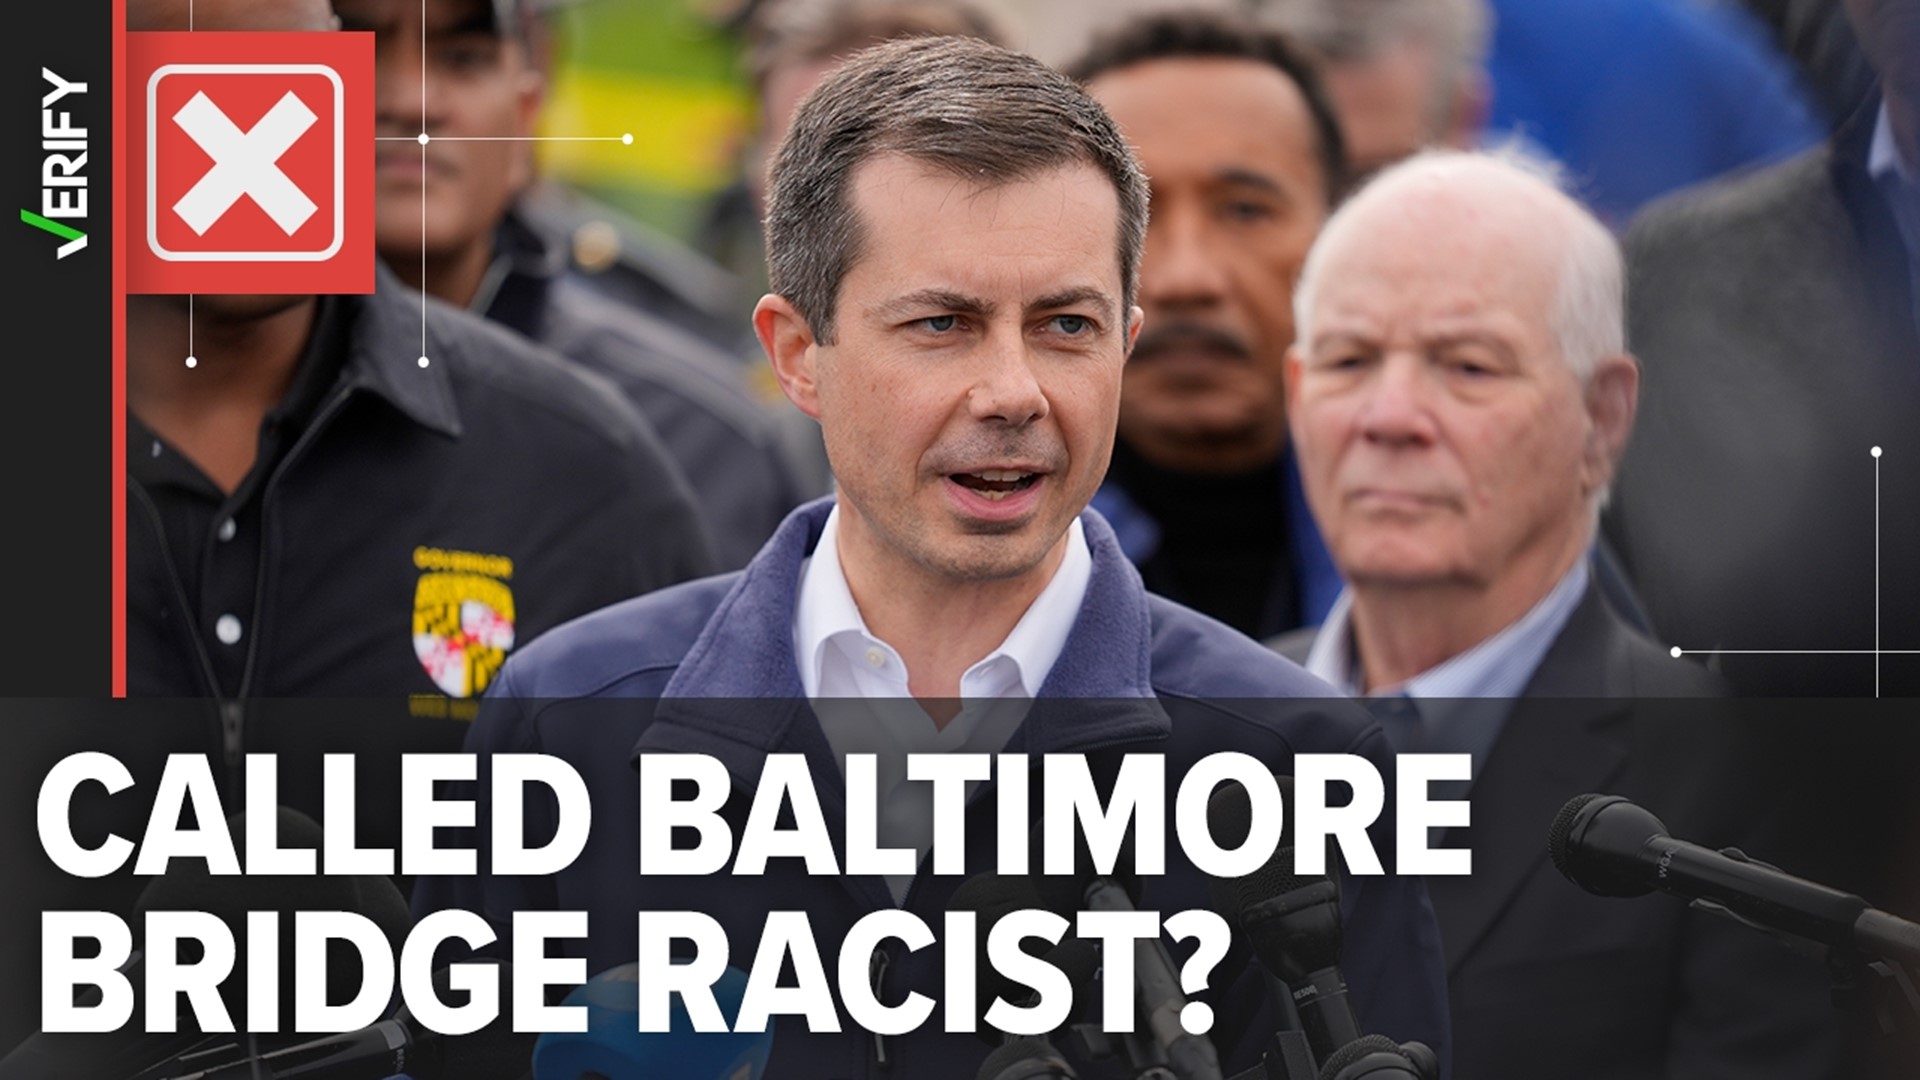 A video of Pete Buttigieg talking about race and infrastructure has been shared with claims he is talking about the Key bridge collapse. The video is from Nov. 2021.